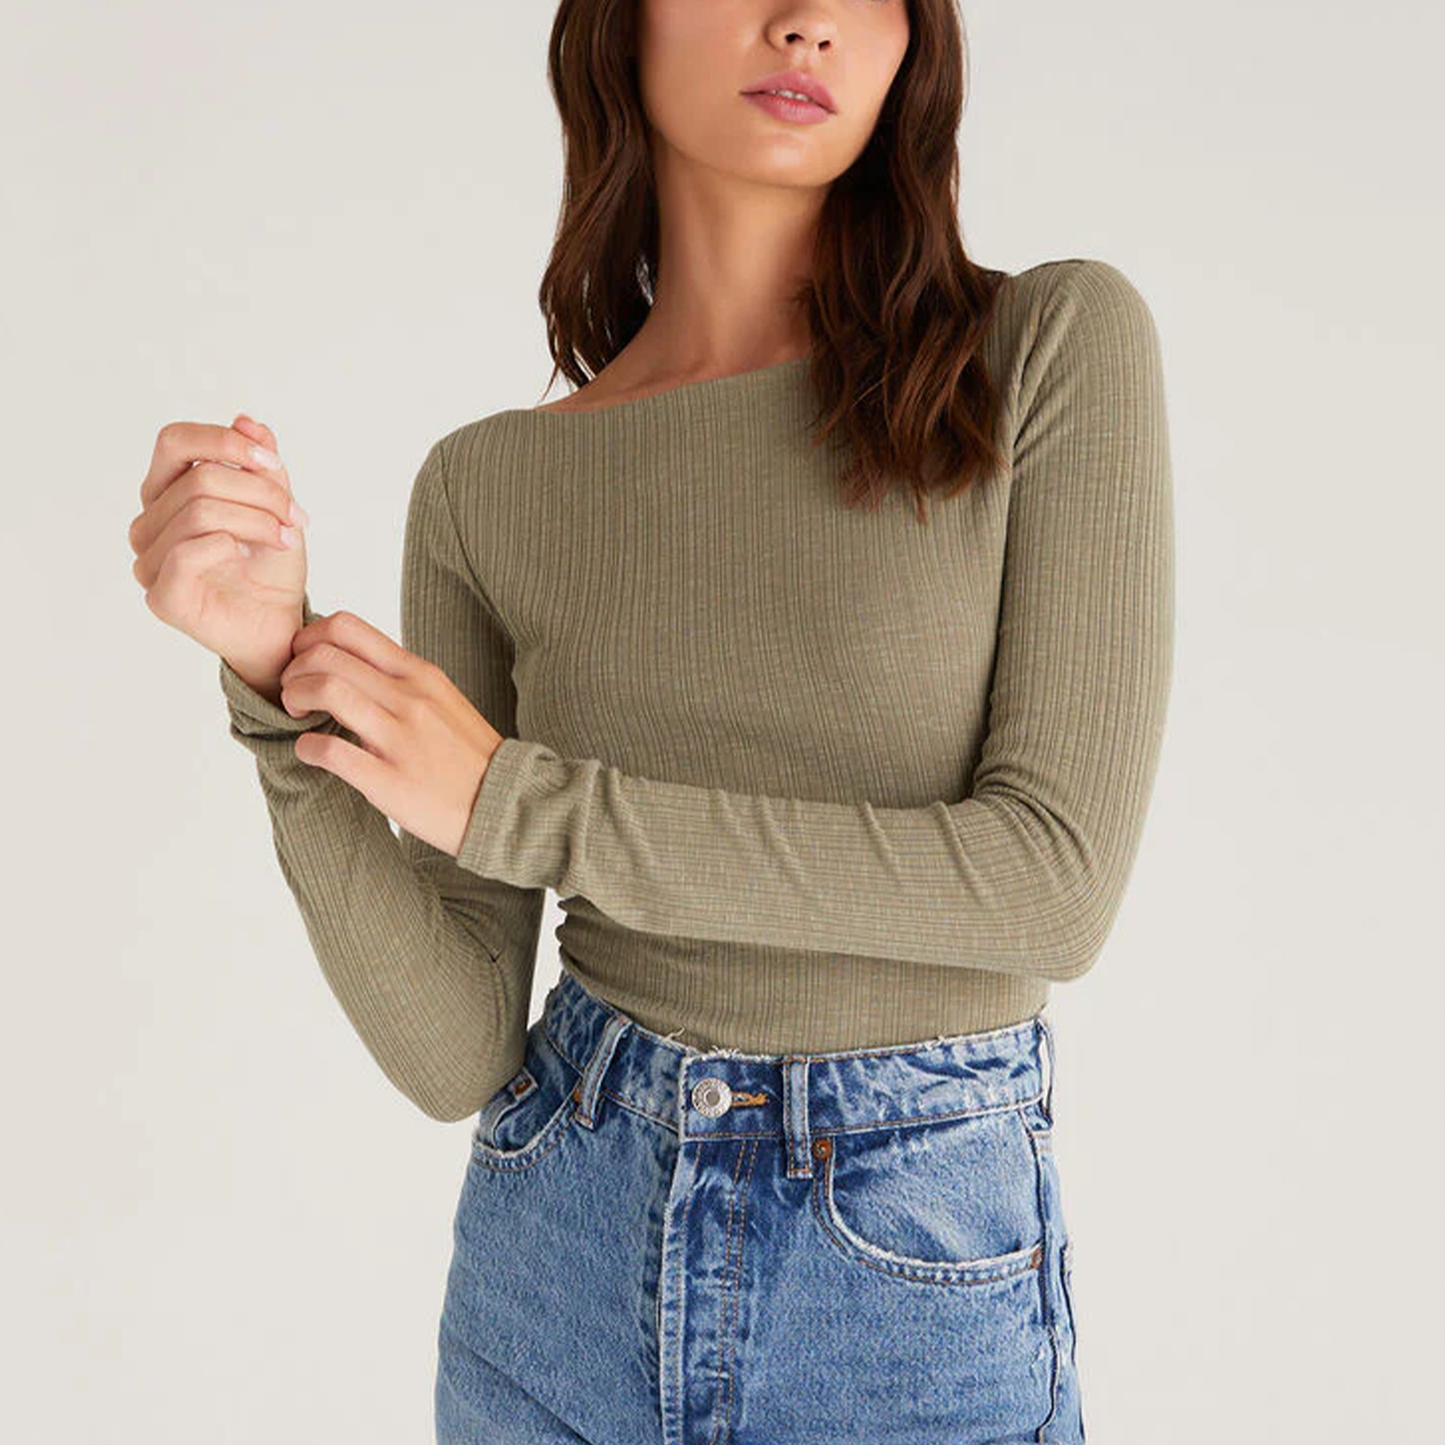 Z Supply Clara Rib Top. The fabric is to die for. You'll be cozy all day long in this soft, ribbed knit. It features a longer length so it's easy to tuck into denim or your favorite midi skirt. It has a slim, flattering fit. The Clara will be one of those basics you will be styling over and over again